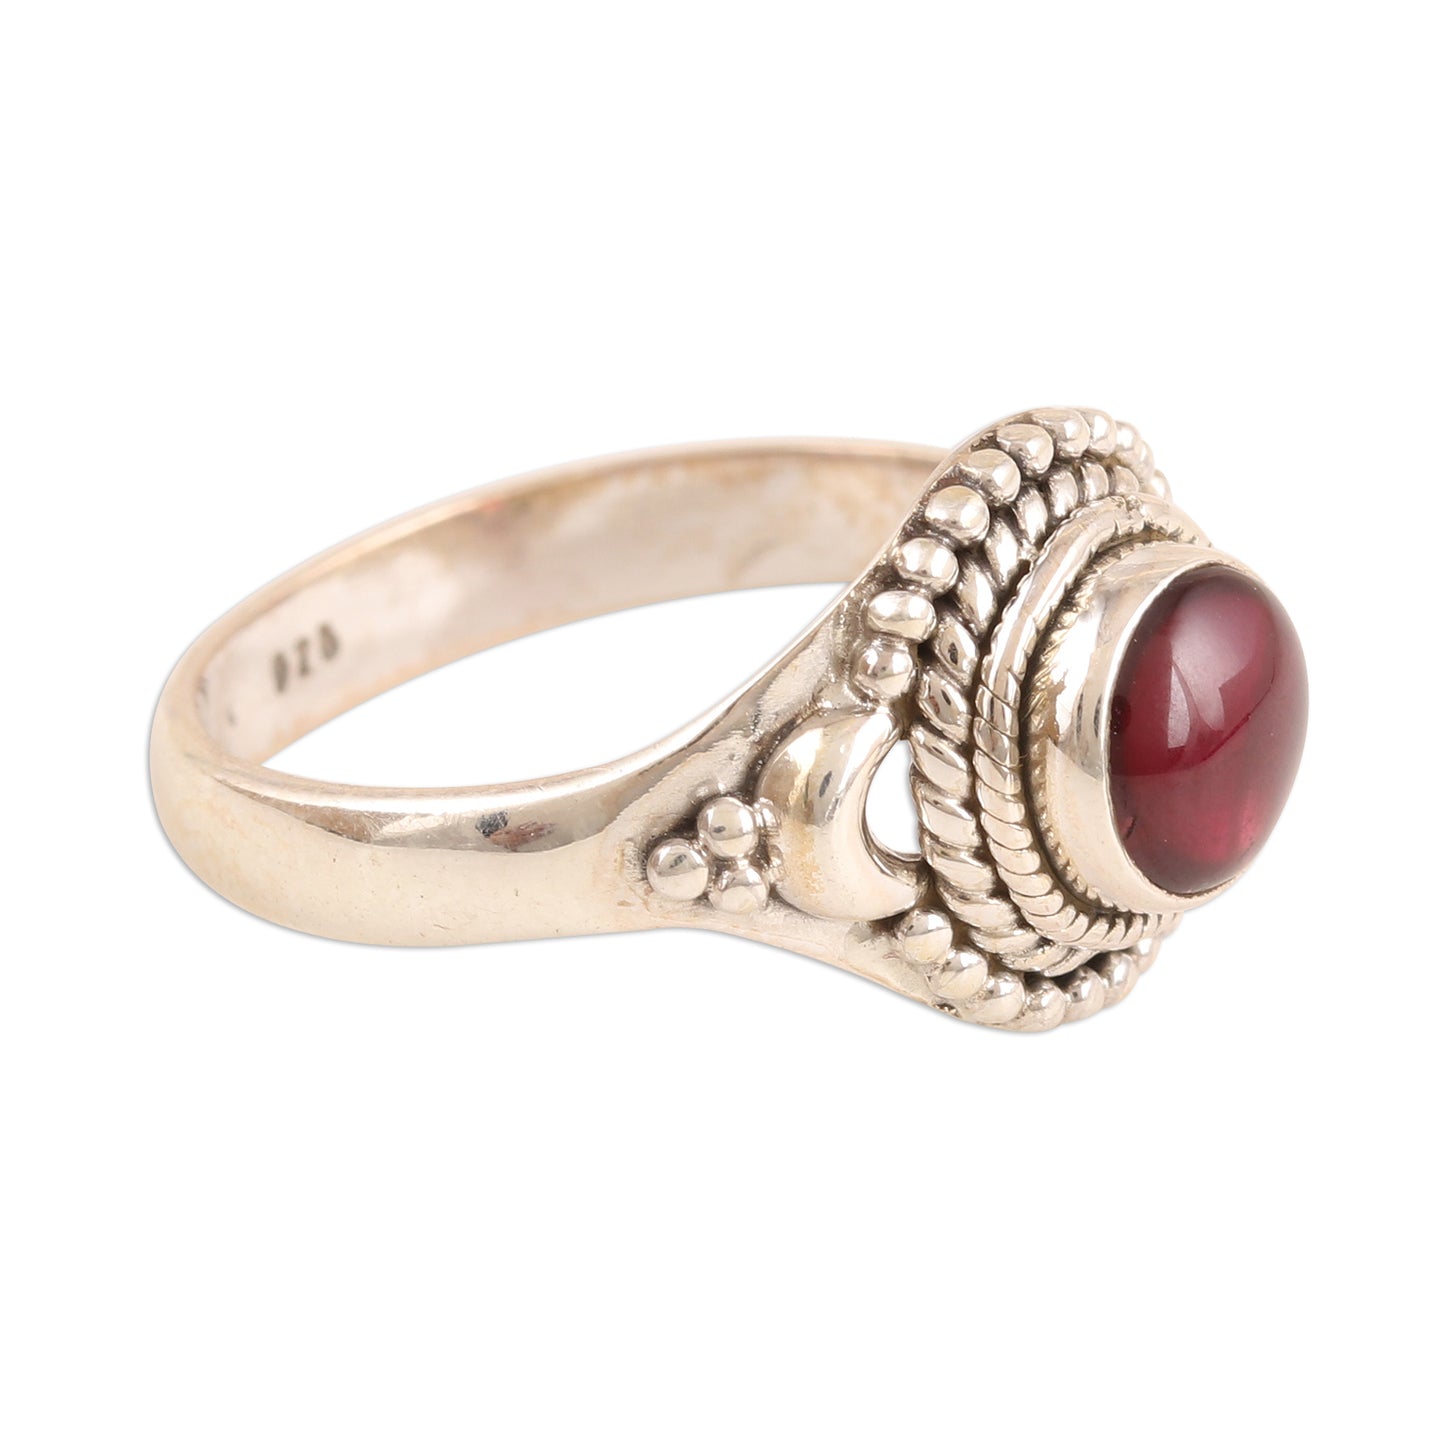 Gemstone Moon Garnet and Sterling Silver Cocktail Ring from India